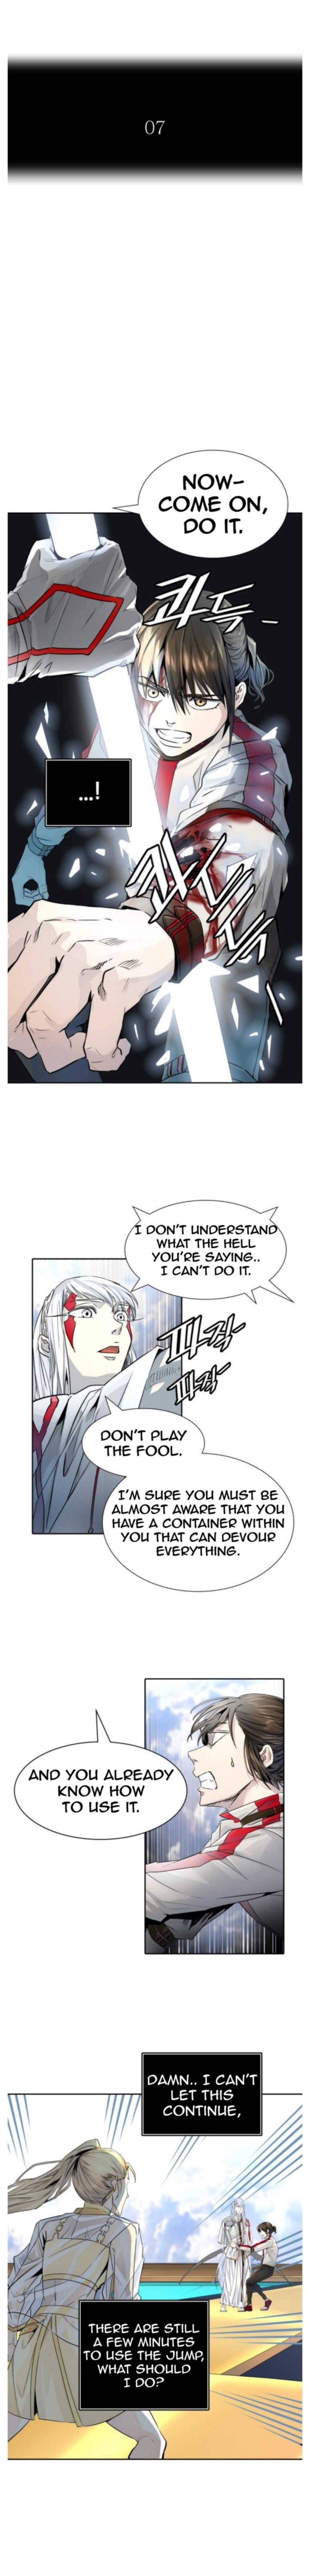 Tower Of God Chapter 498 Page 4